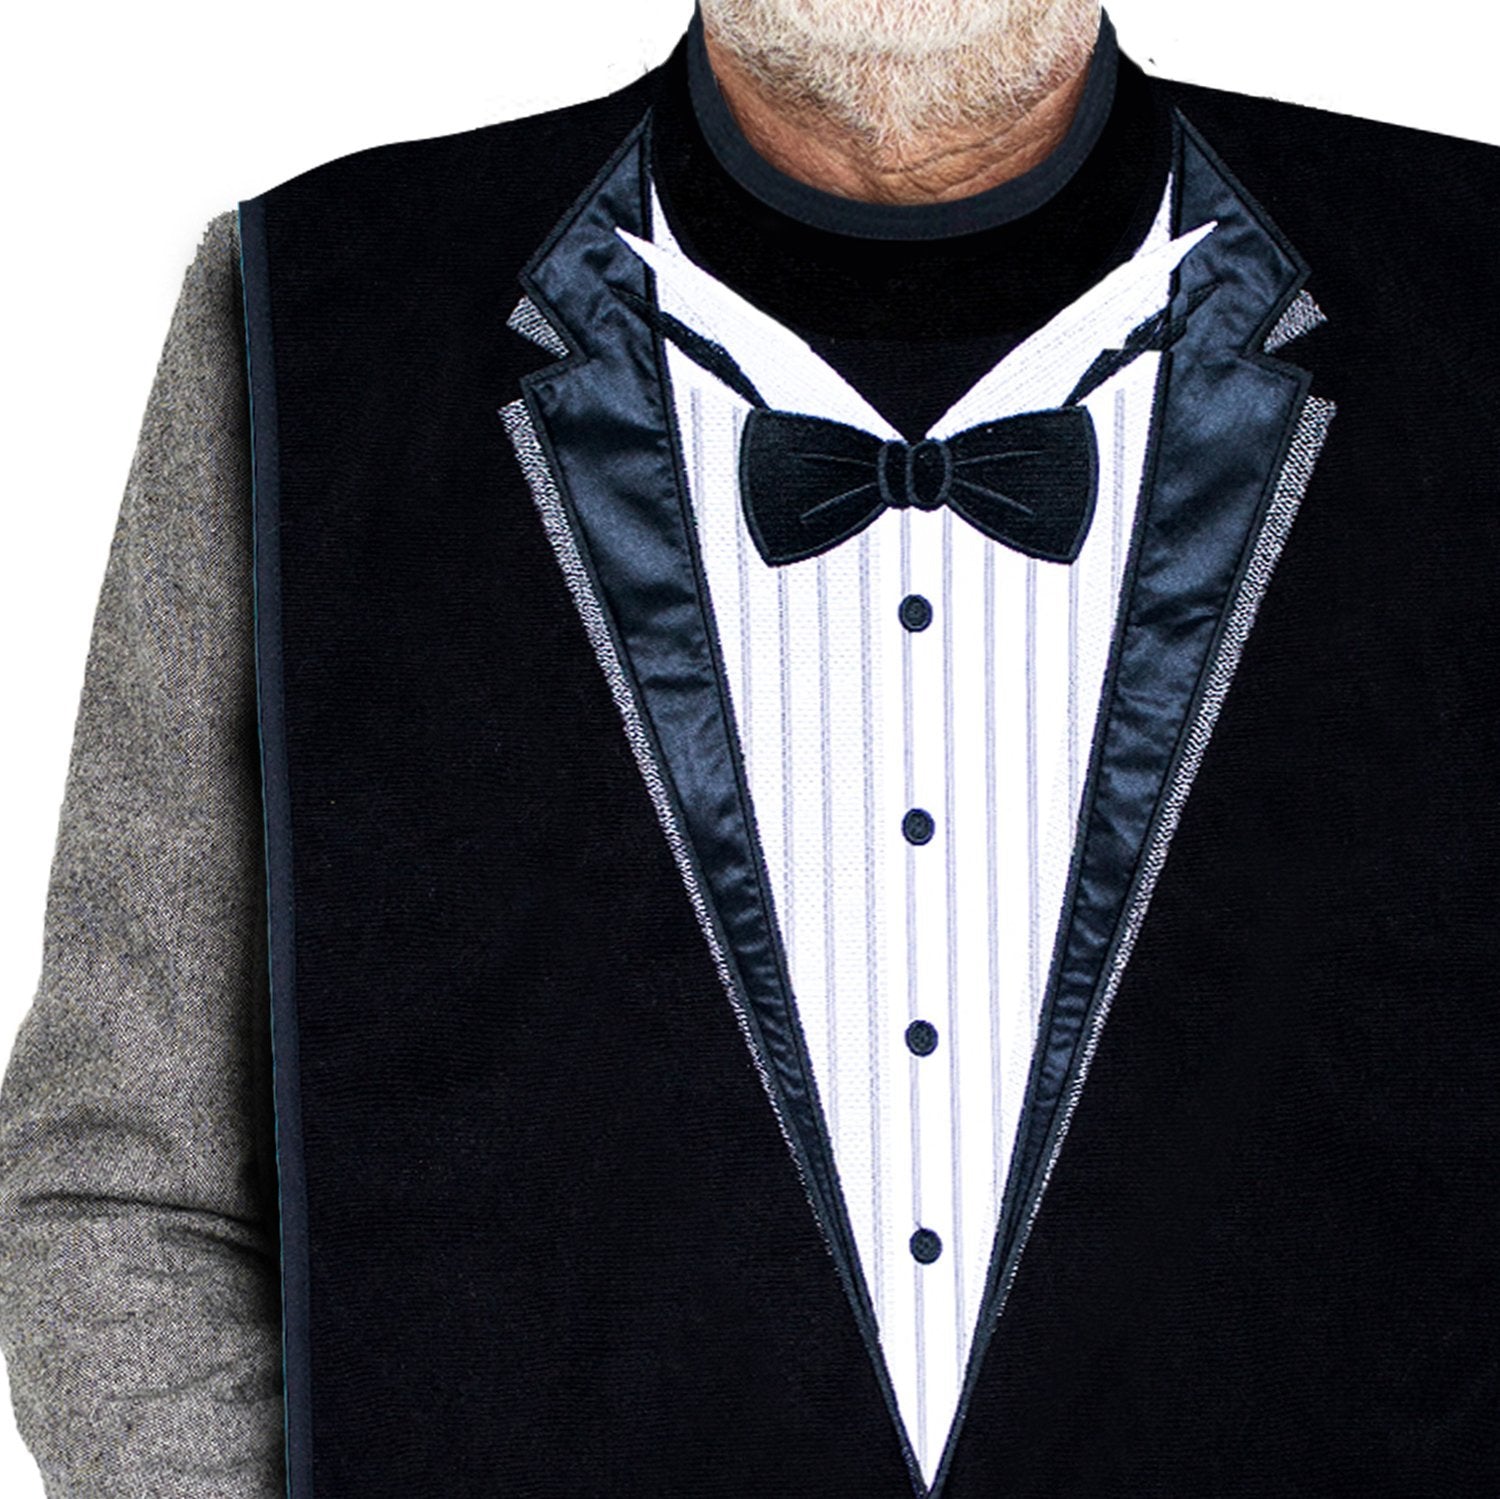 Men's Dress 'n Dine™ Adult Bibs with Sweater and Tie & Tuxedo (2 Pack) - Classy Pal Dress 'n Dine Adult Bibs